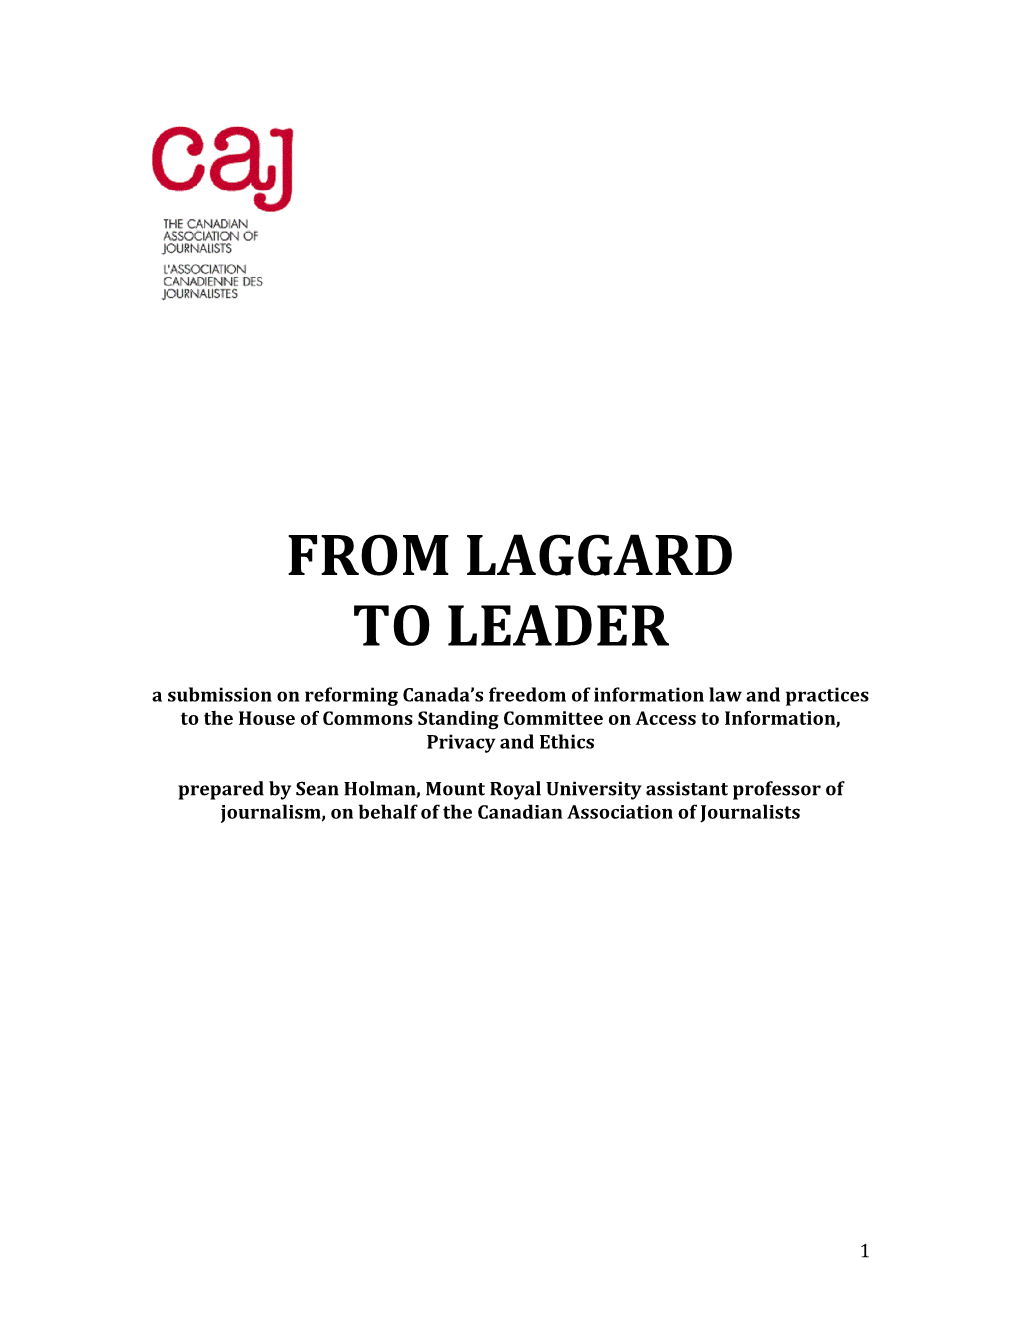 From Laggard to Leader